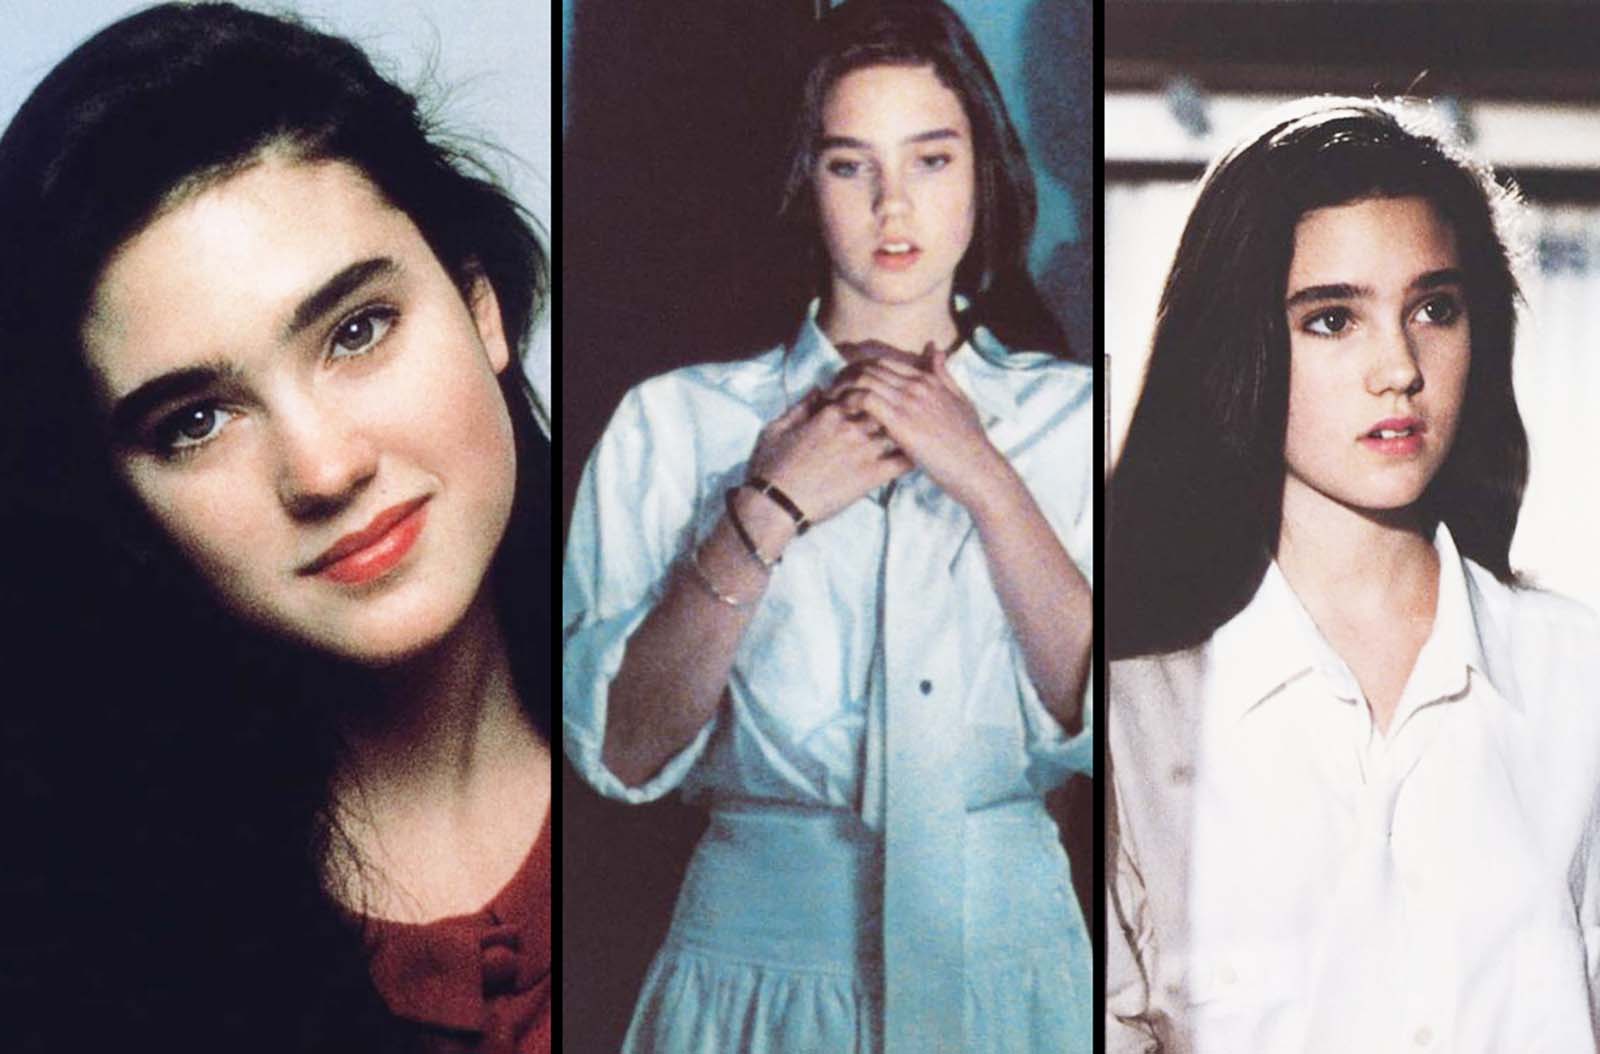 Stunning Photos of a Young Jennifer Connelly from the 1980s